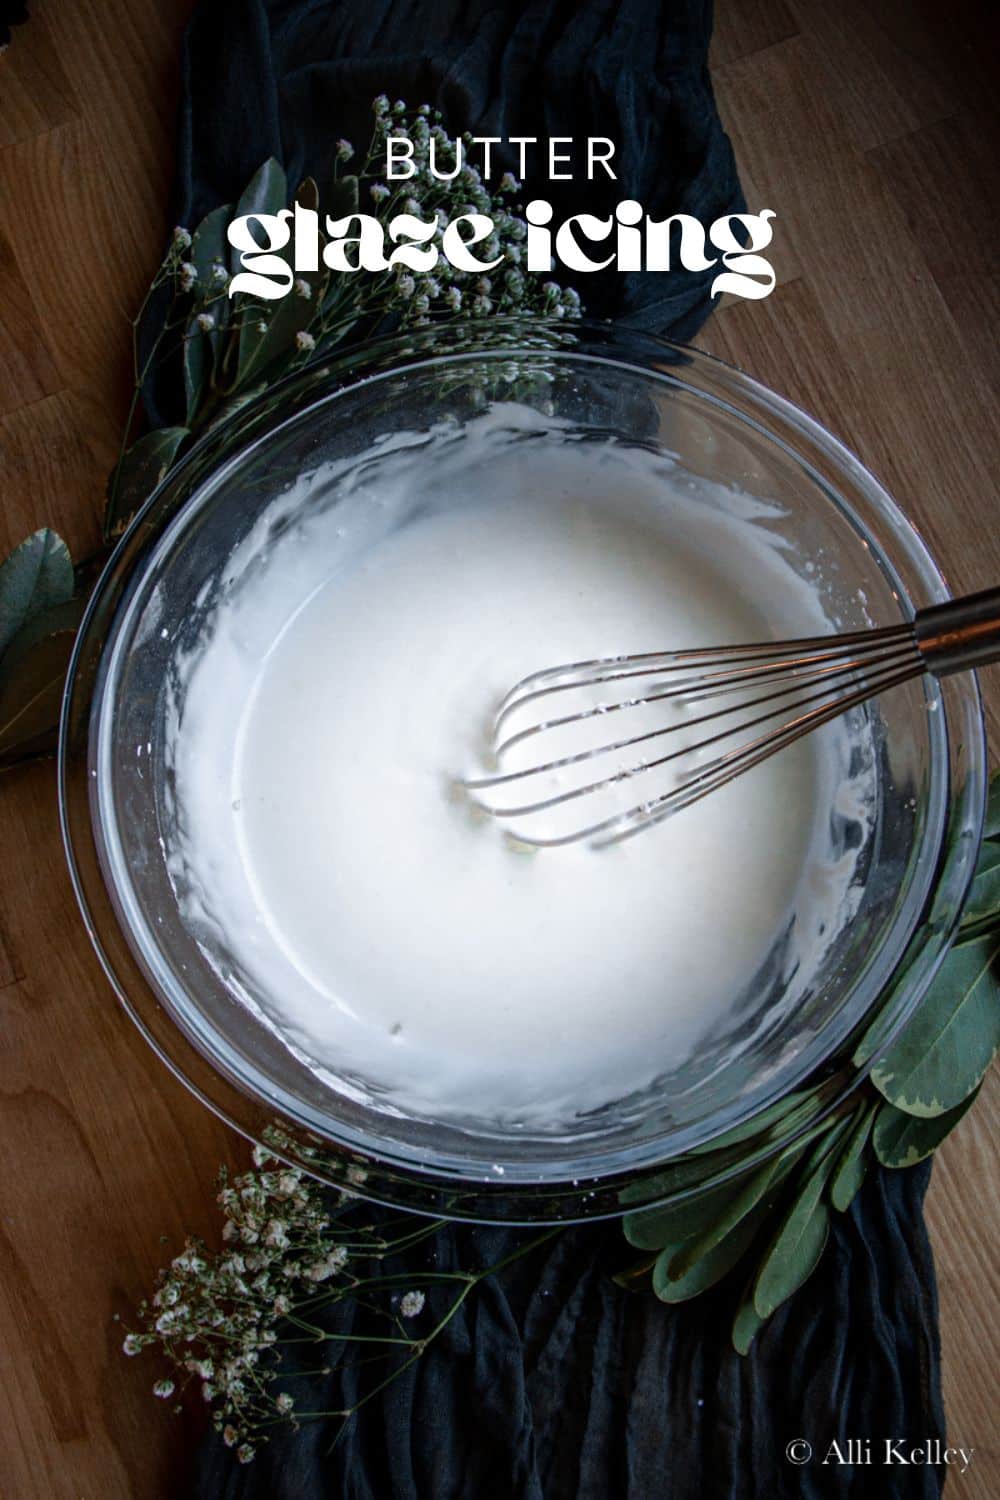 Topping any baked treat with this glaze icing recipe will take it from good to great! Simple, sweet, and oh-so-delicious - glaze icing is a classic that never goes out of style. Made with just a few ingredients, it's also incredibly easy to whip up. So the next time you need a tasty topping, give this glazed icing recipe a try!